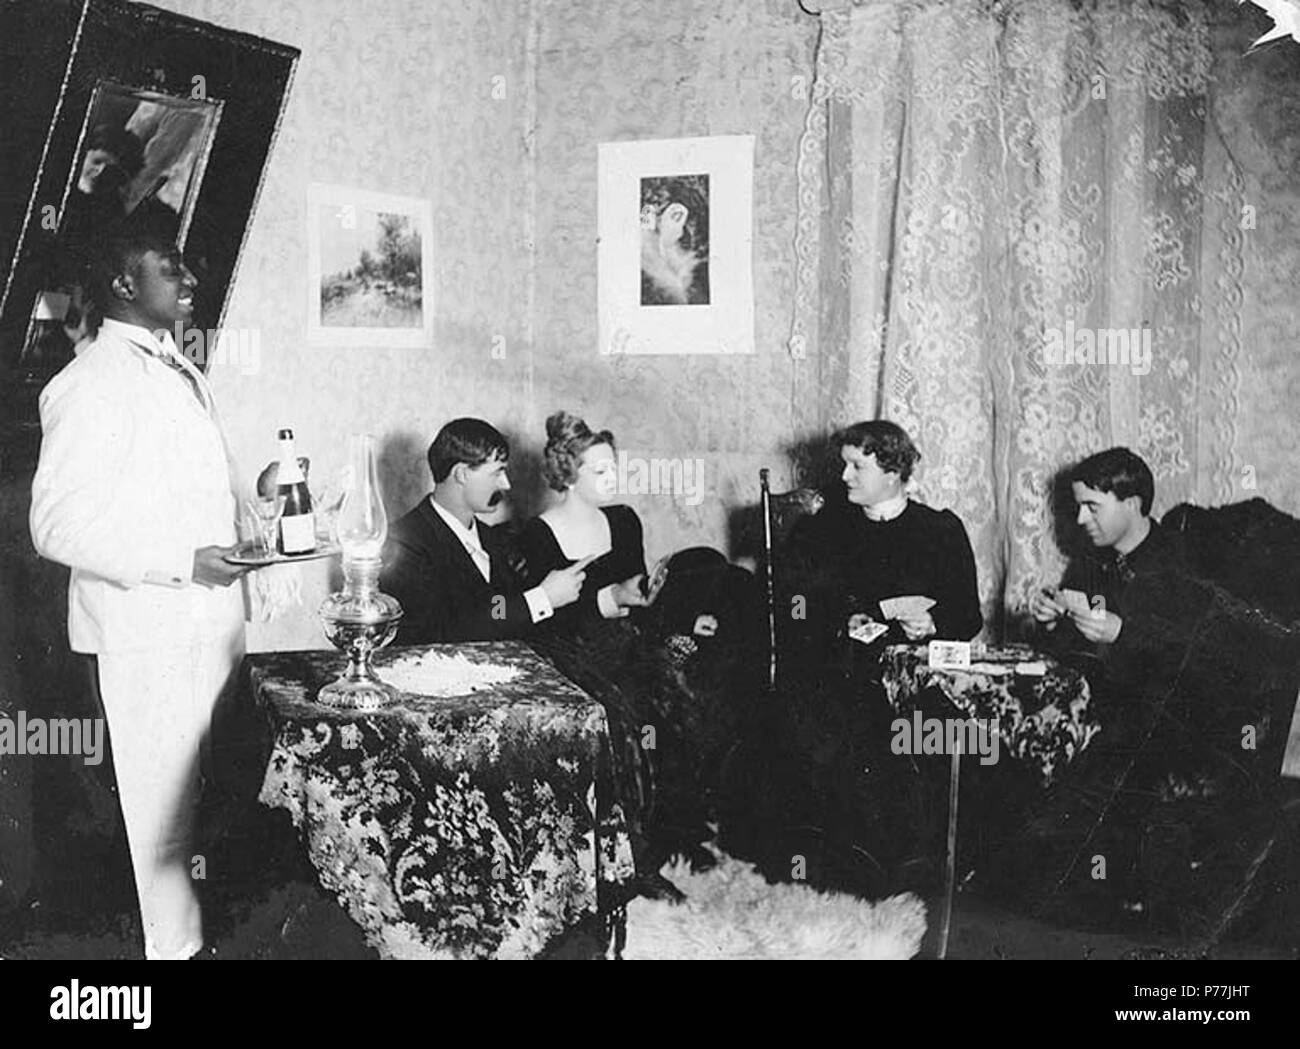 . English: Social scene showing interior of parlor, Dawson, Yukon Territory, ca. 1898. English: Parlor scene with men and woman seated eating, drinking and playing cards. Afro-American man is standing to the left . Caption on image: 'A social call on one of Dawson's fairest. Hegg & Co. Flash Light...Y.T.' Left to right are Black Prince, a prize fighter connected with the Monte Carlo; a man called Jack; Gertie Lovejoy, best known as Diamond Tooth Gertie; Cad Wilson, … ; and Tommy Dolan, brother of comedian Eddie Dolan. (Murray Morgan, One Man's Gold Rush, p. 161) Original image in Hegg Album B, Stock Photo